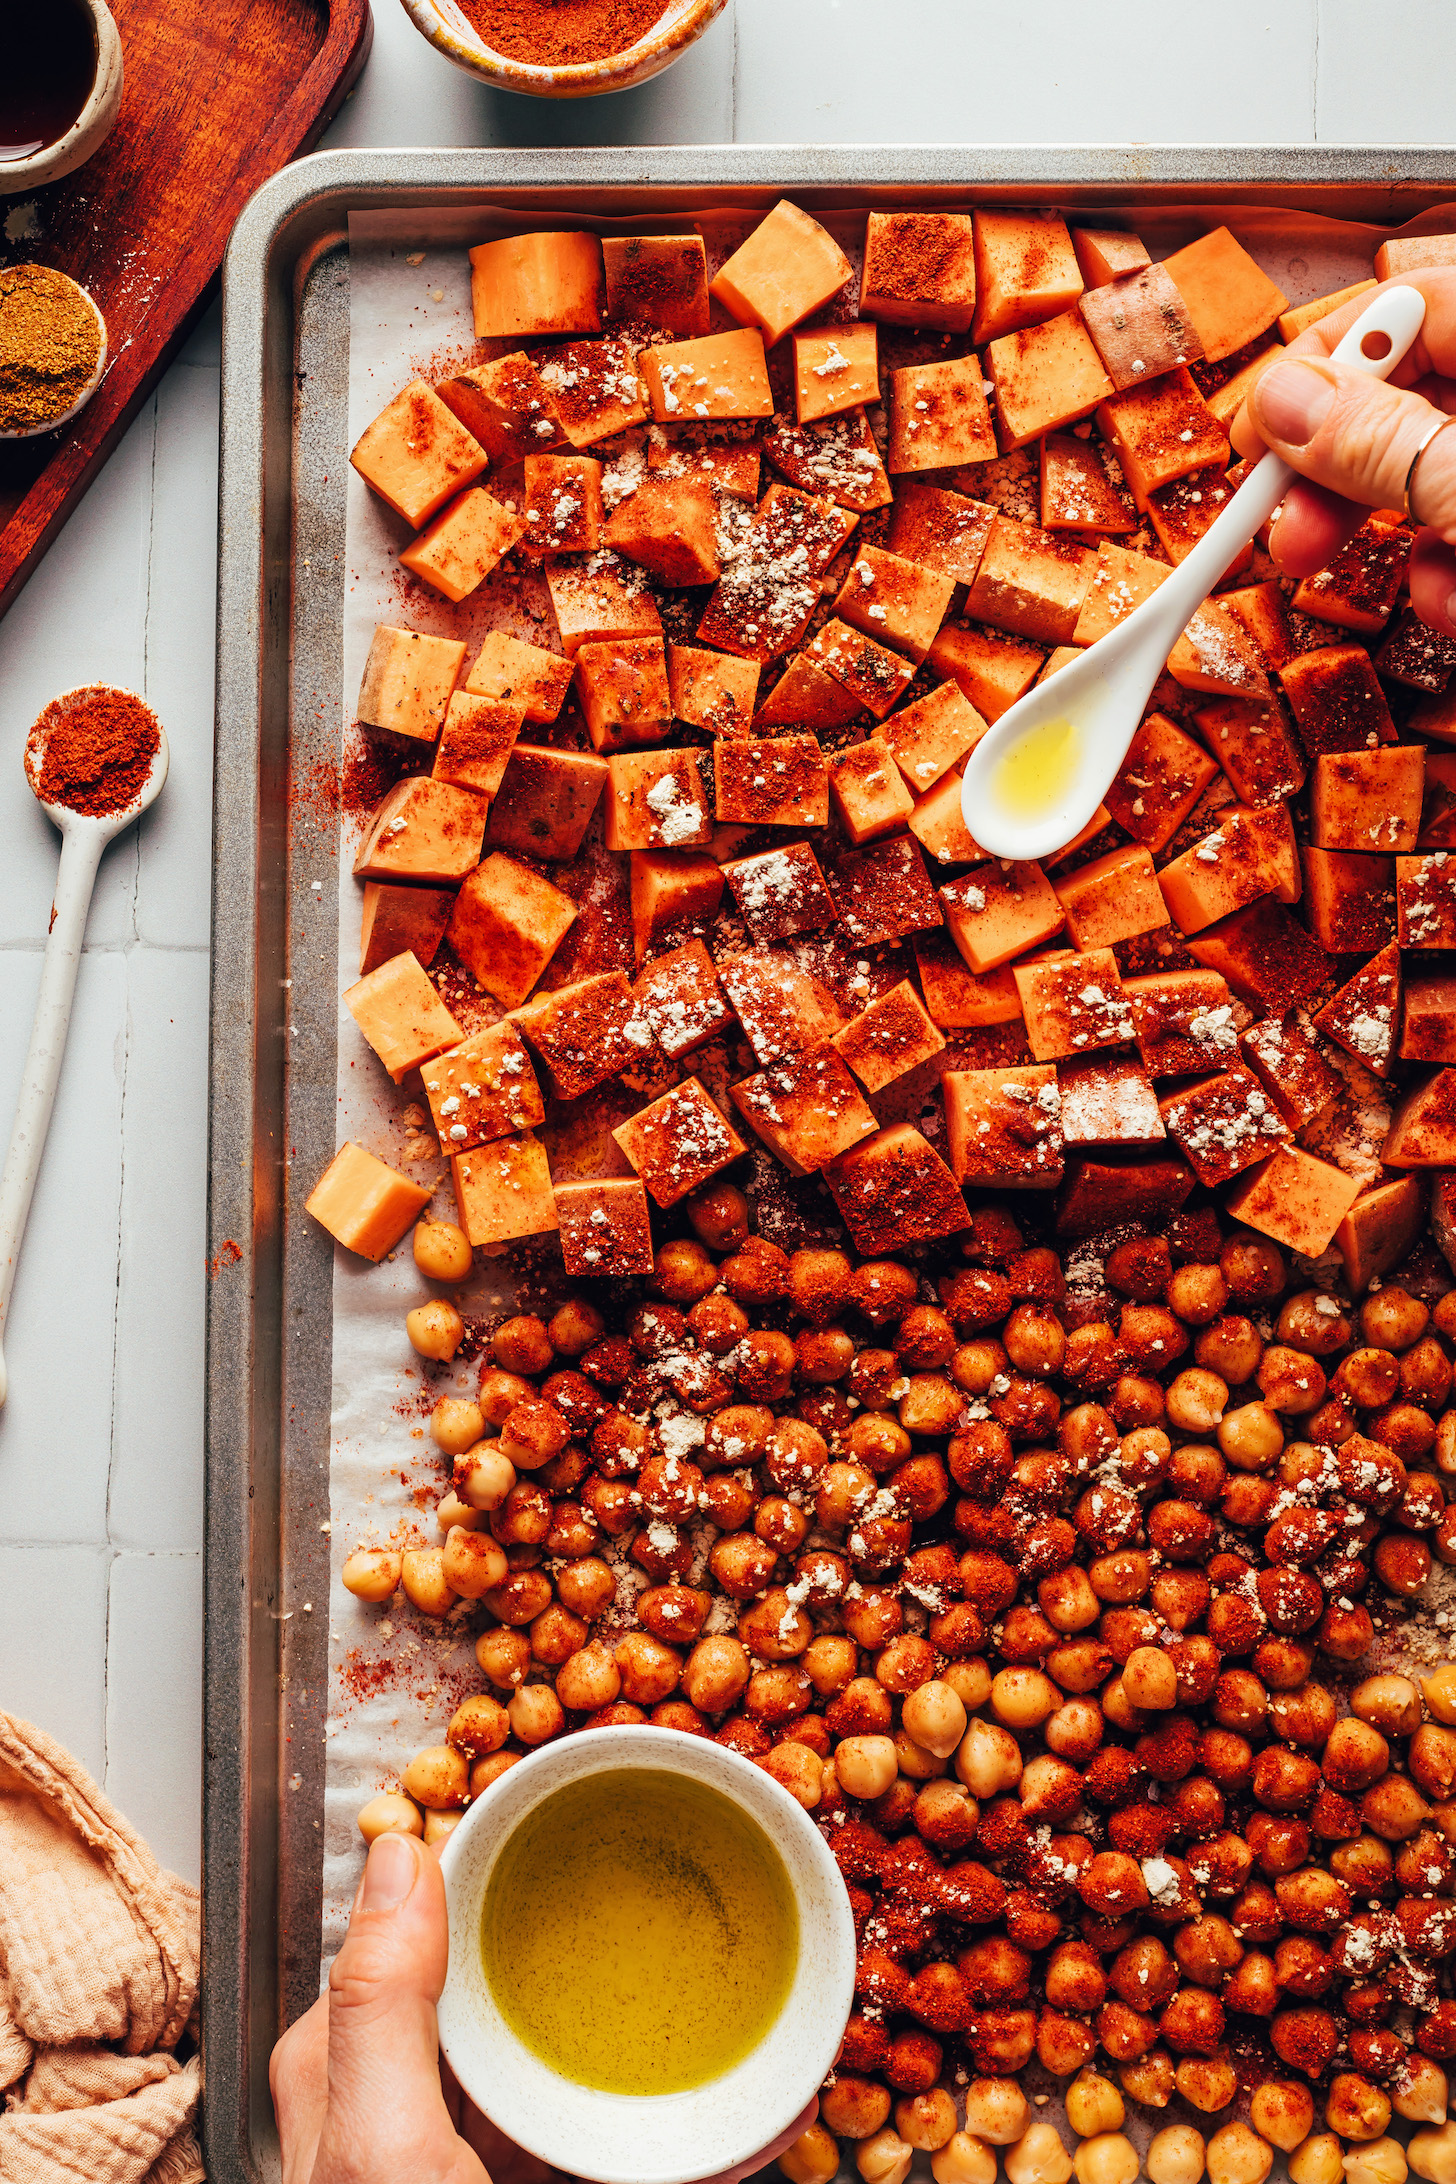 Drizzling oil onto a baking sheet of chickpeas and cubed sweet potatoes